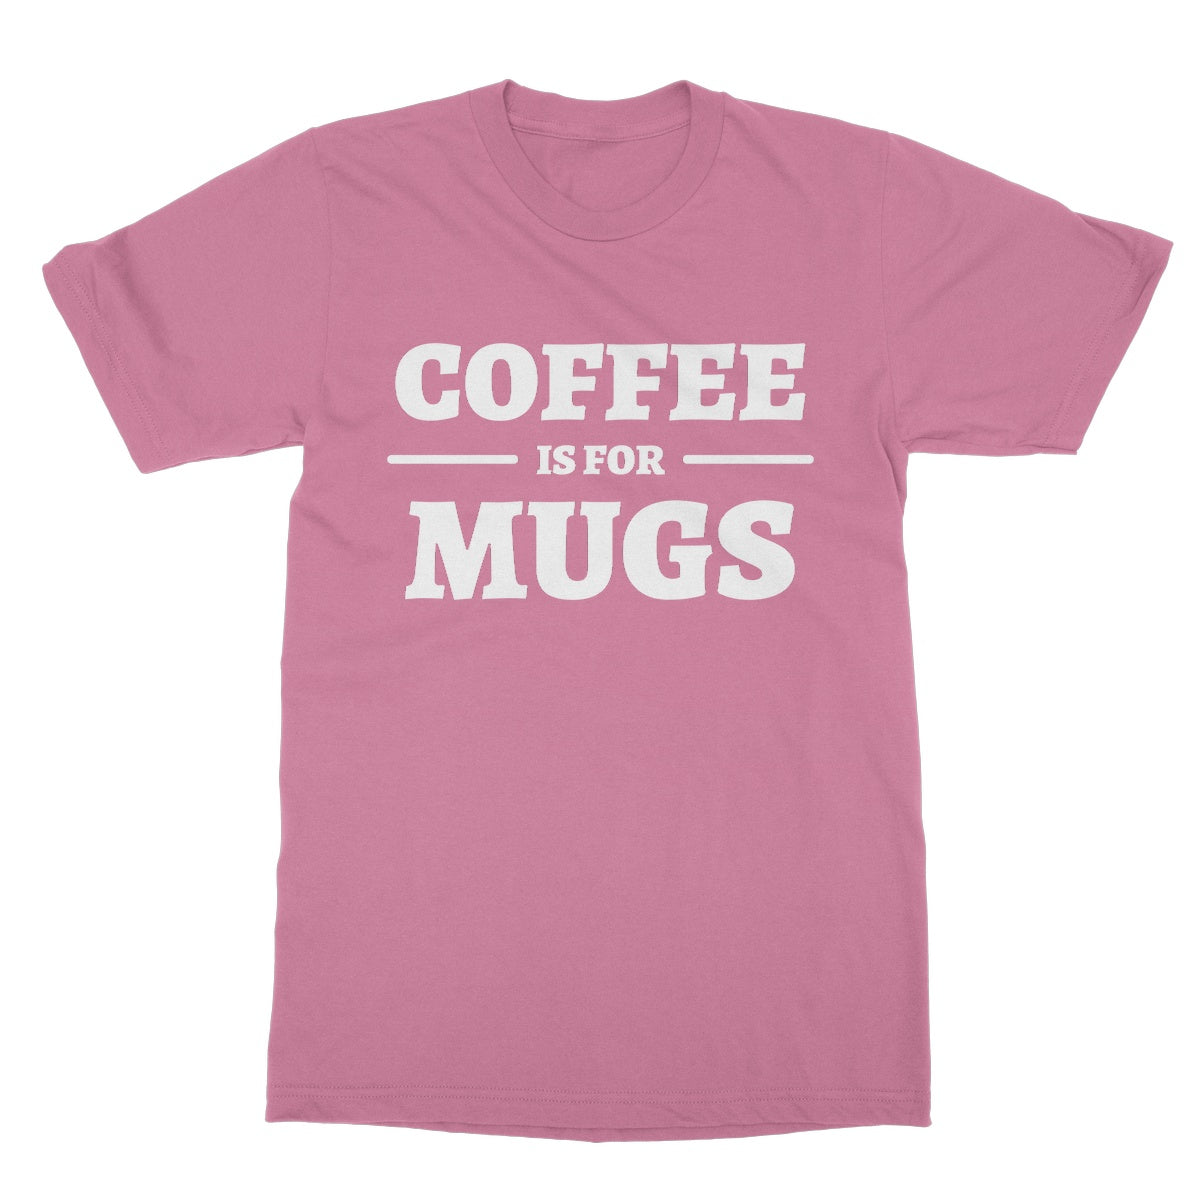 coffee is for mugs t shirt pink